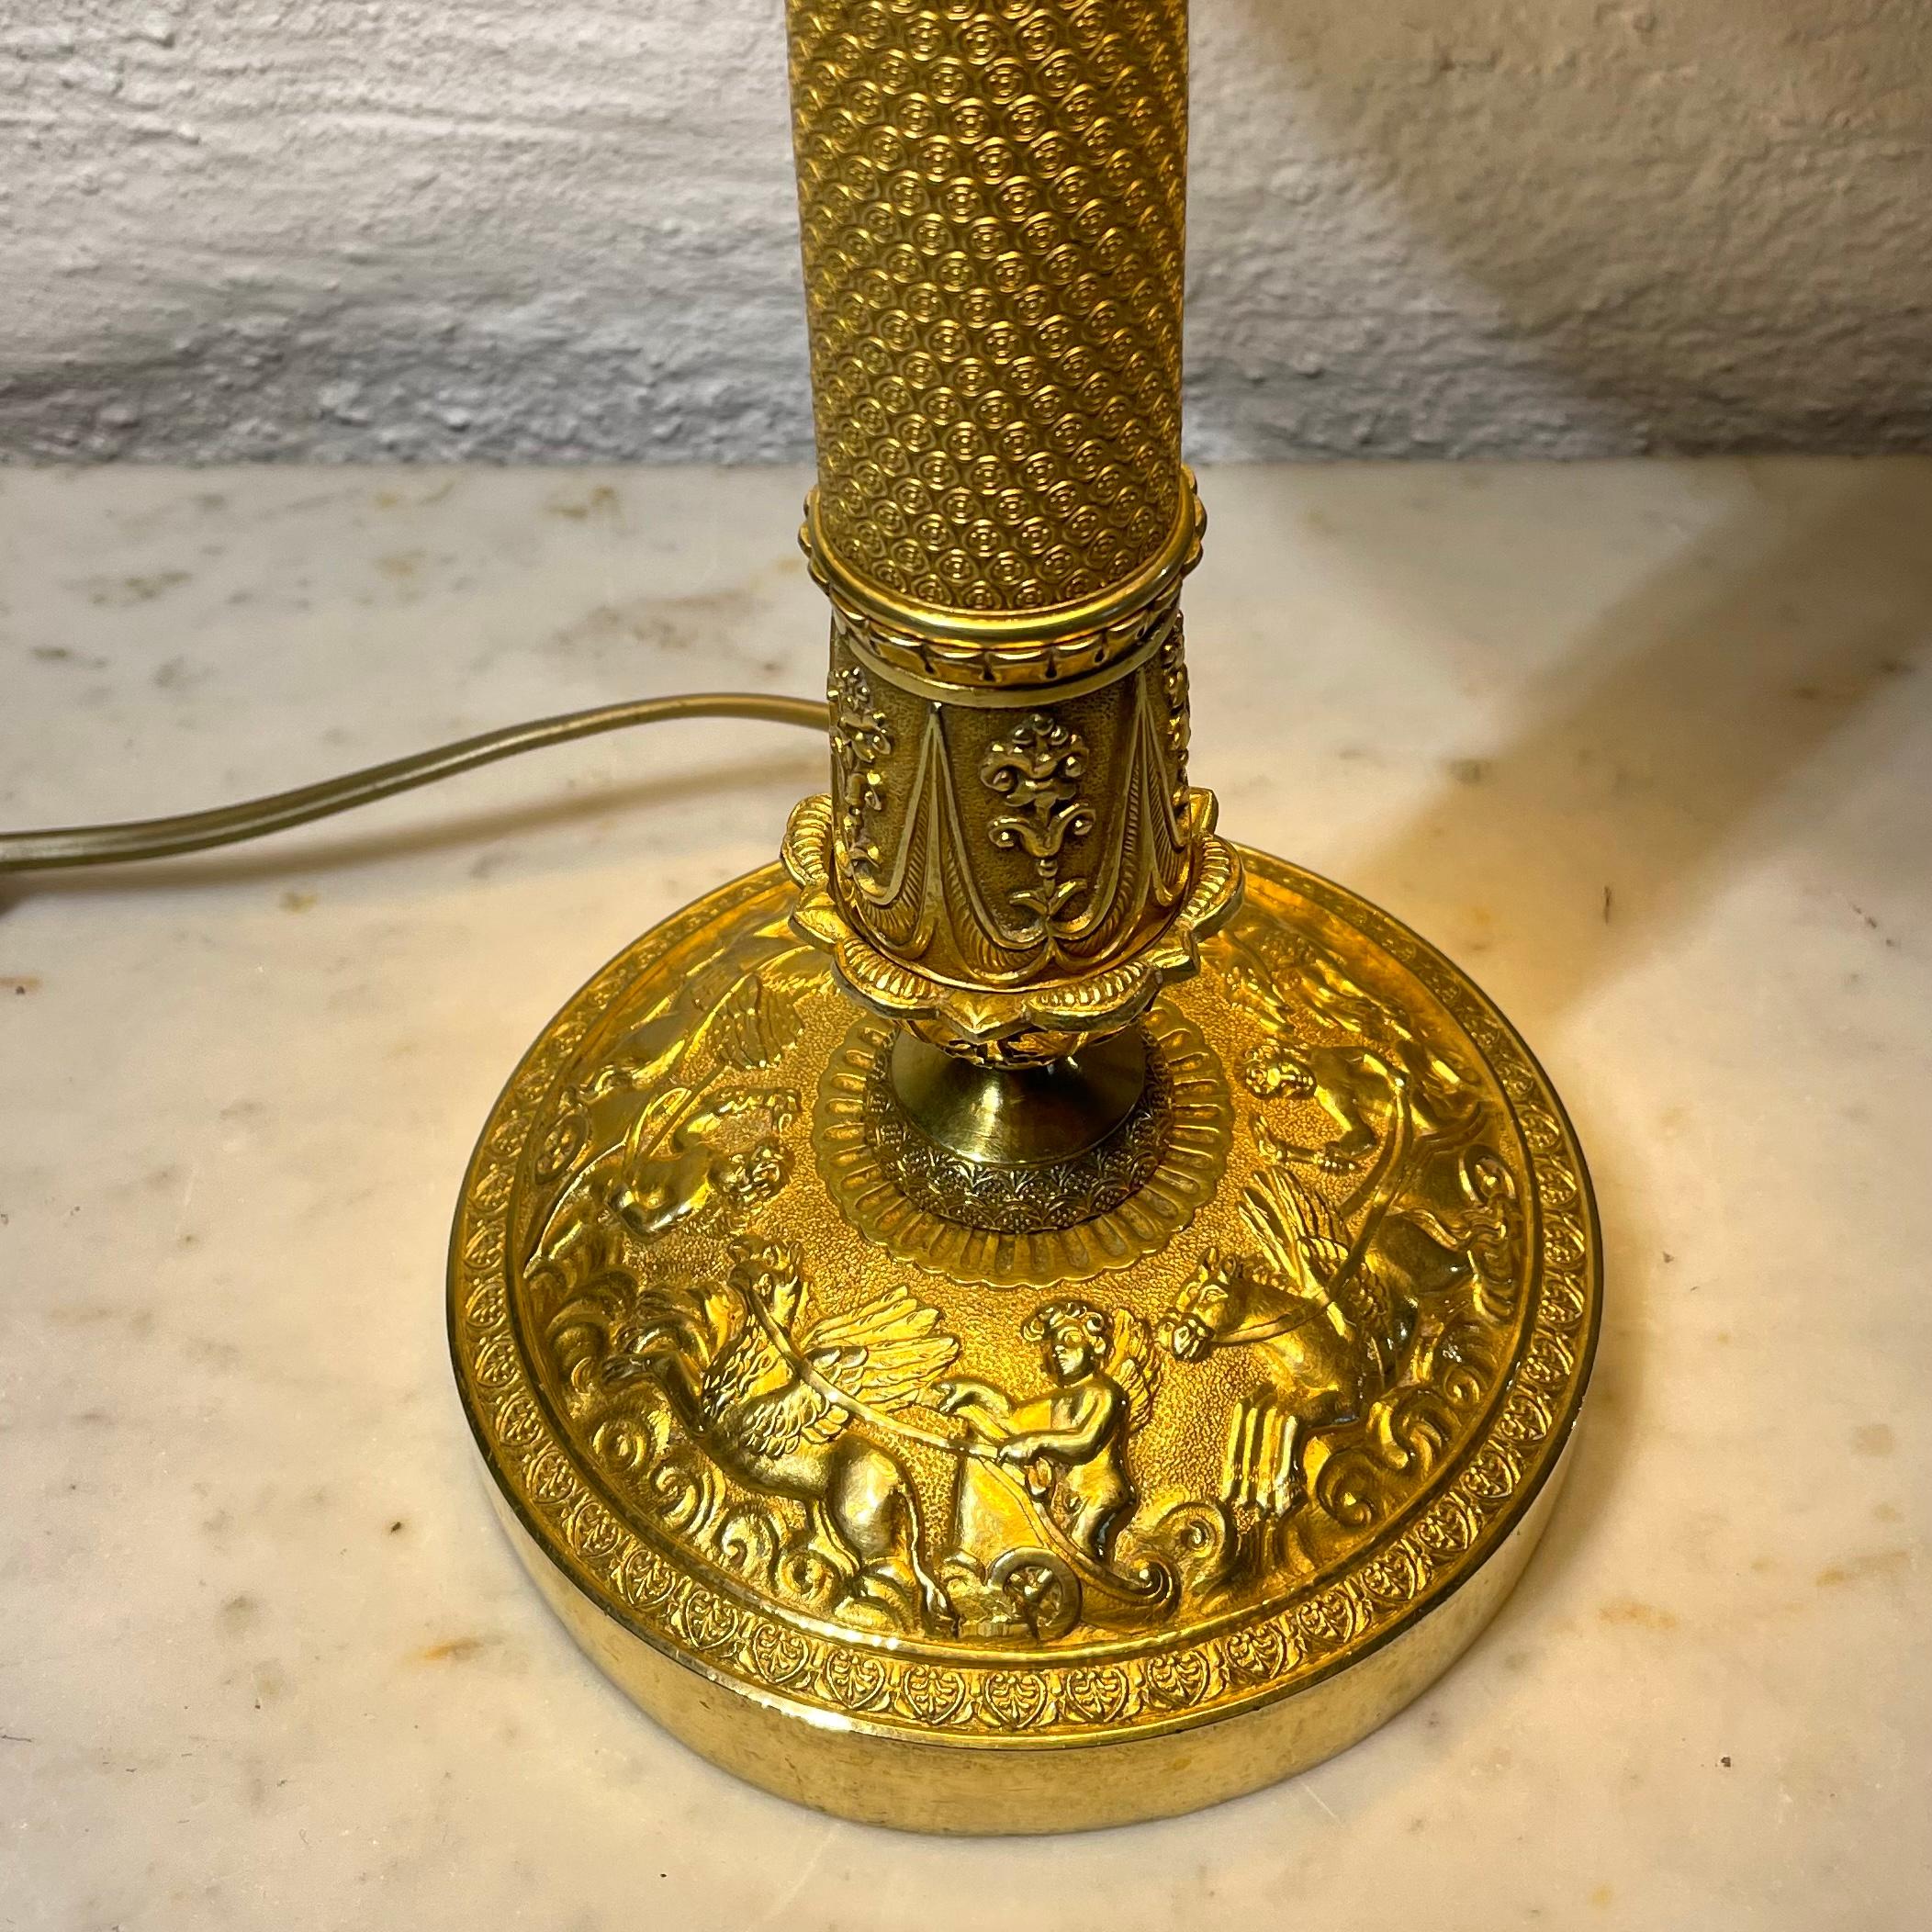 Gold Plate Table Lamp in Gilded Bronze, Originally an Empire Candlestick from the 1820s